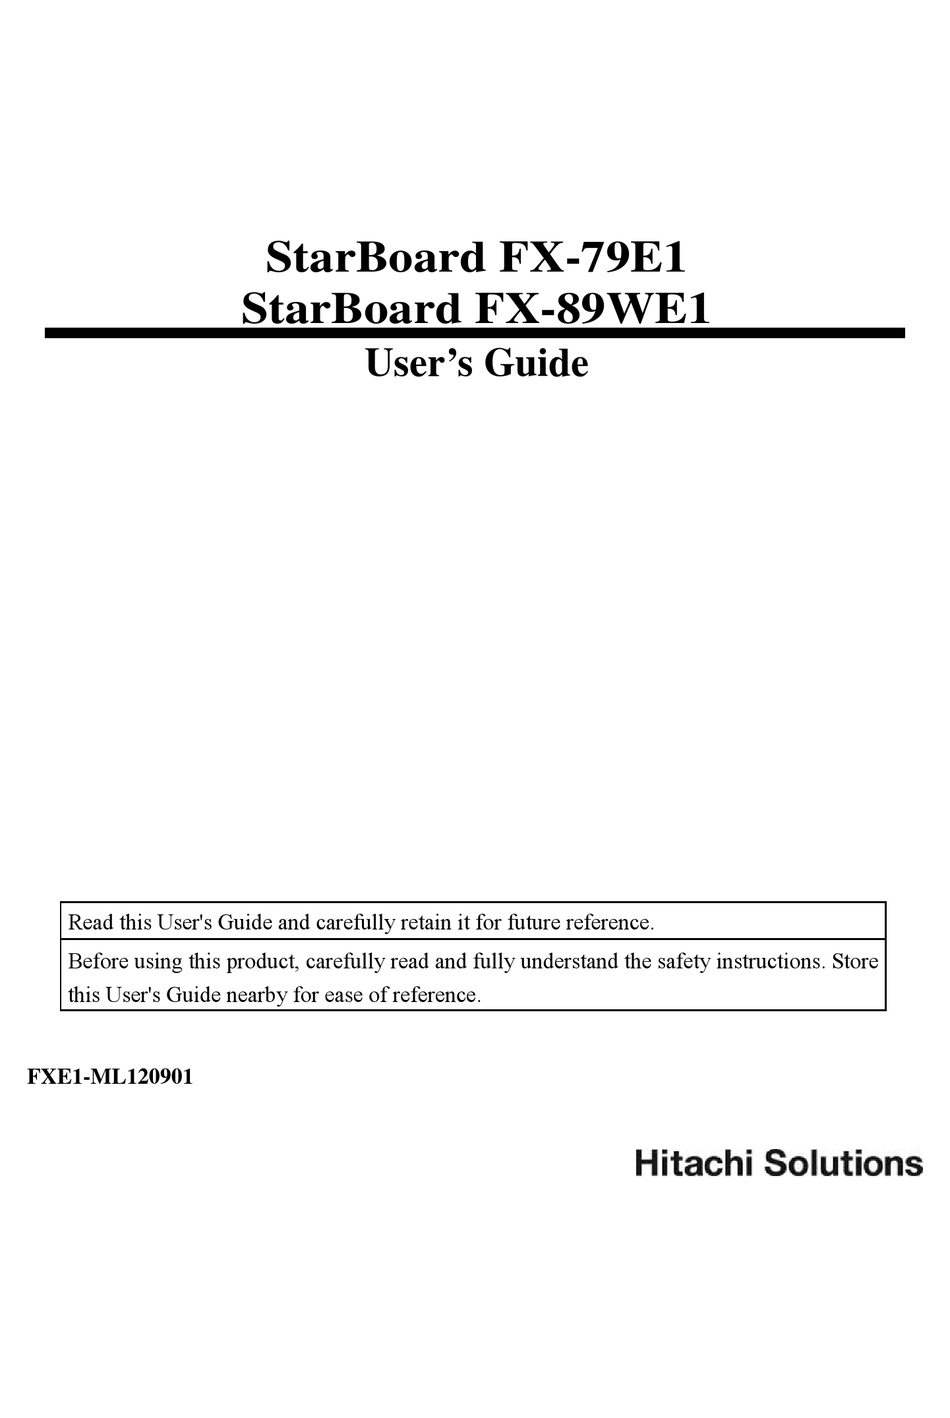 hitachi starboard mounting solutions